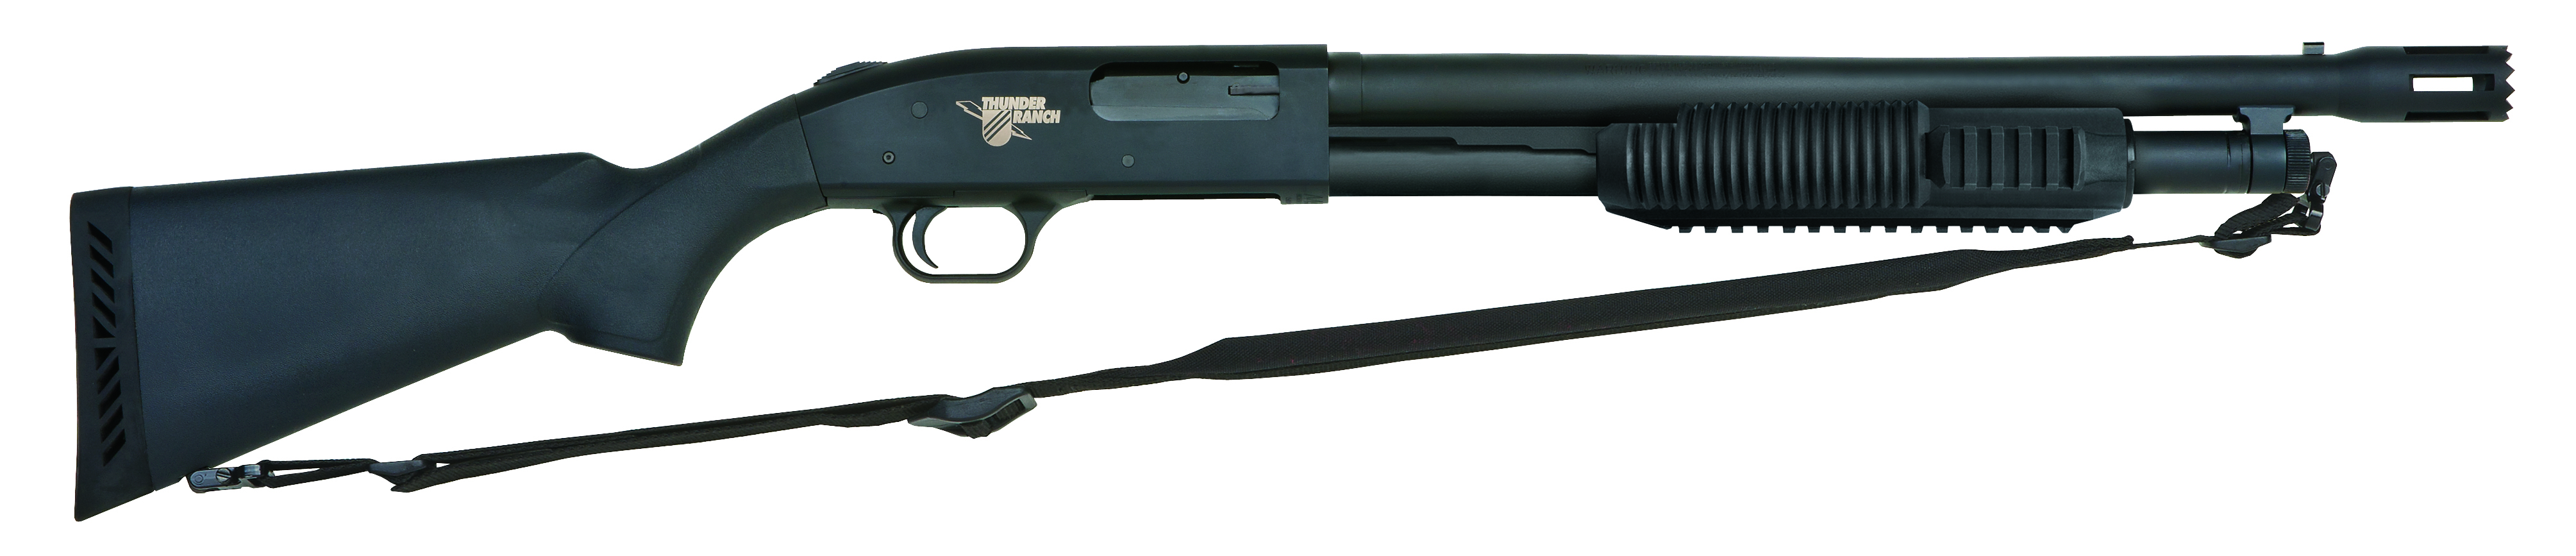 Mossberg 500 Shotgun Pics, Weapons Collection